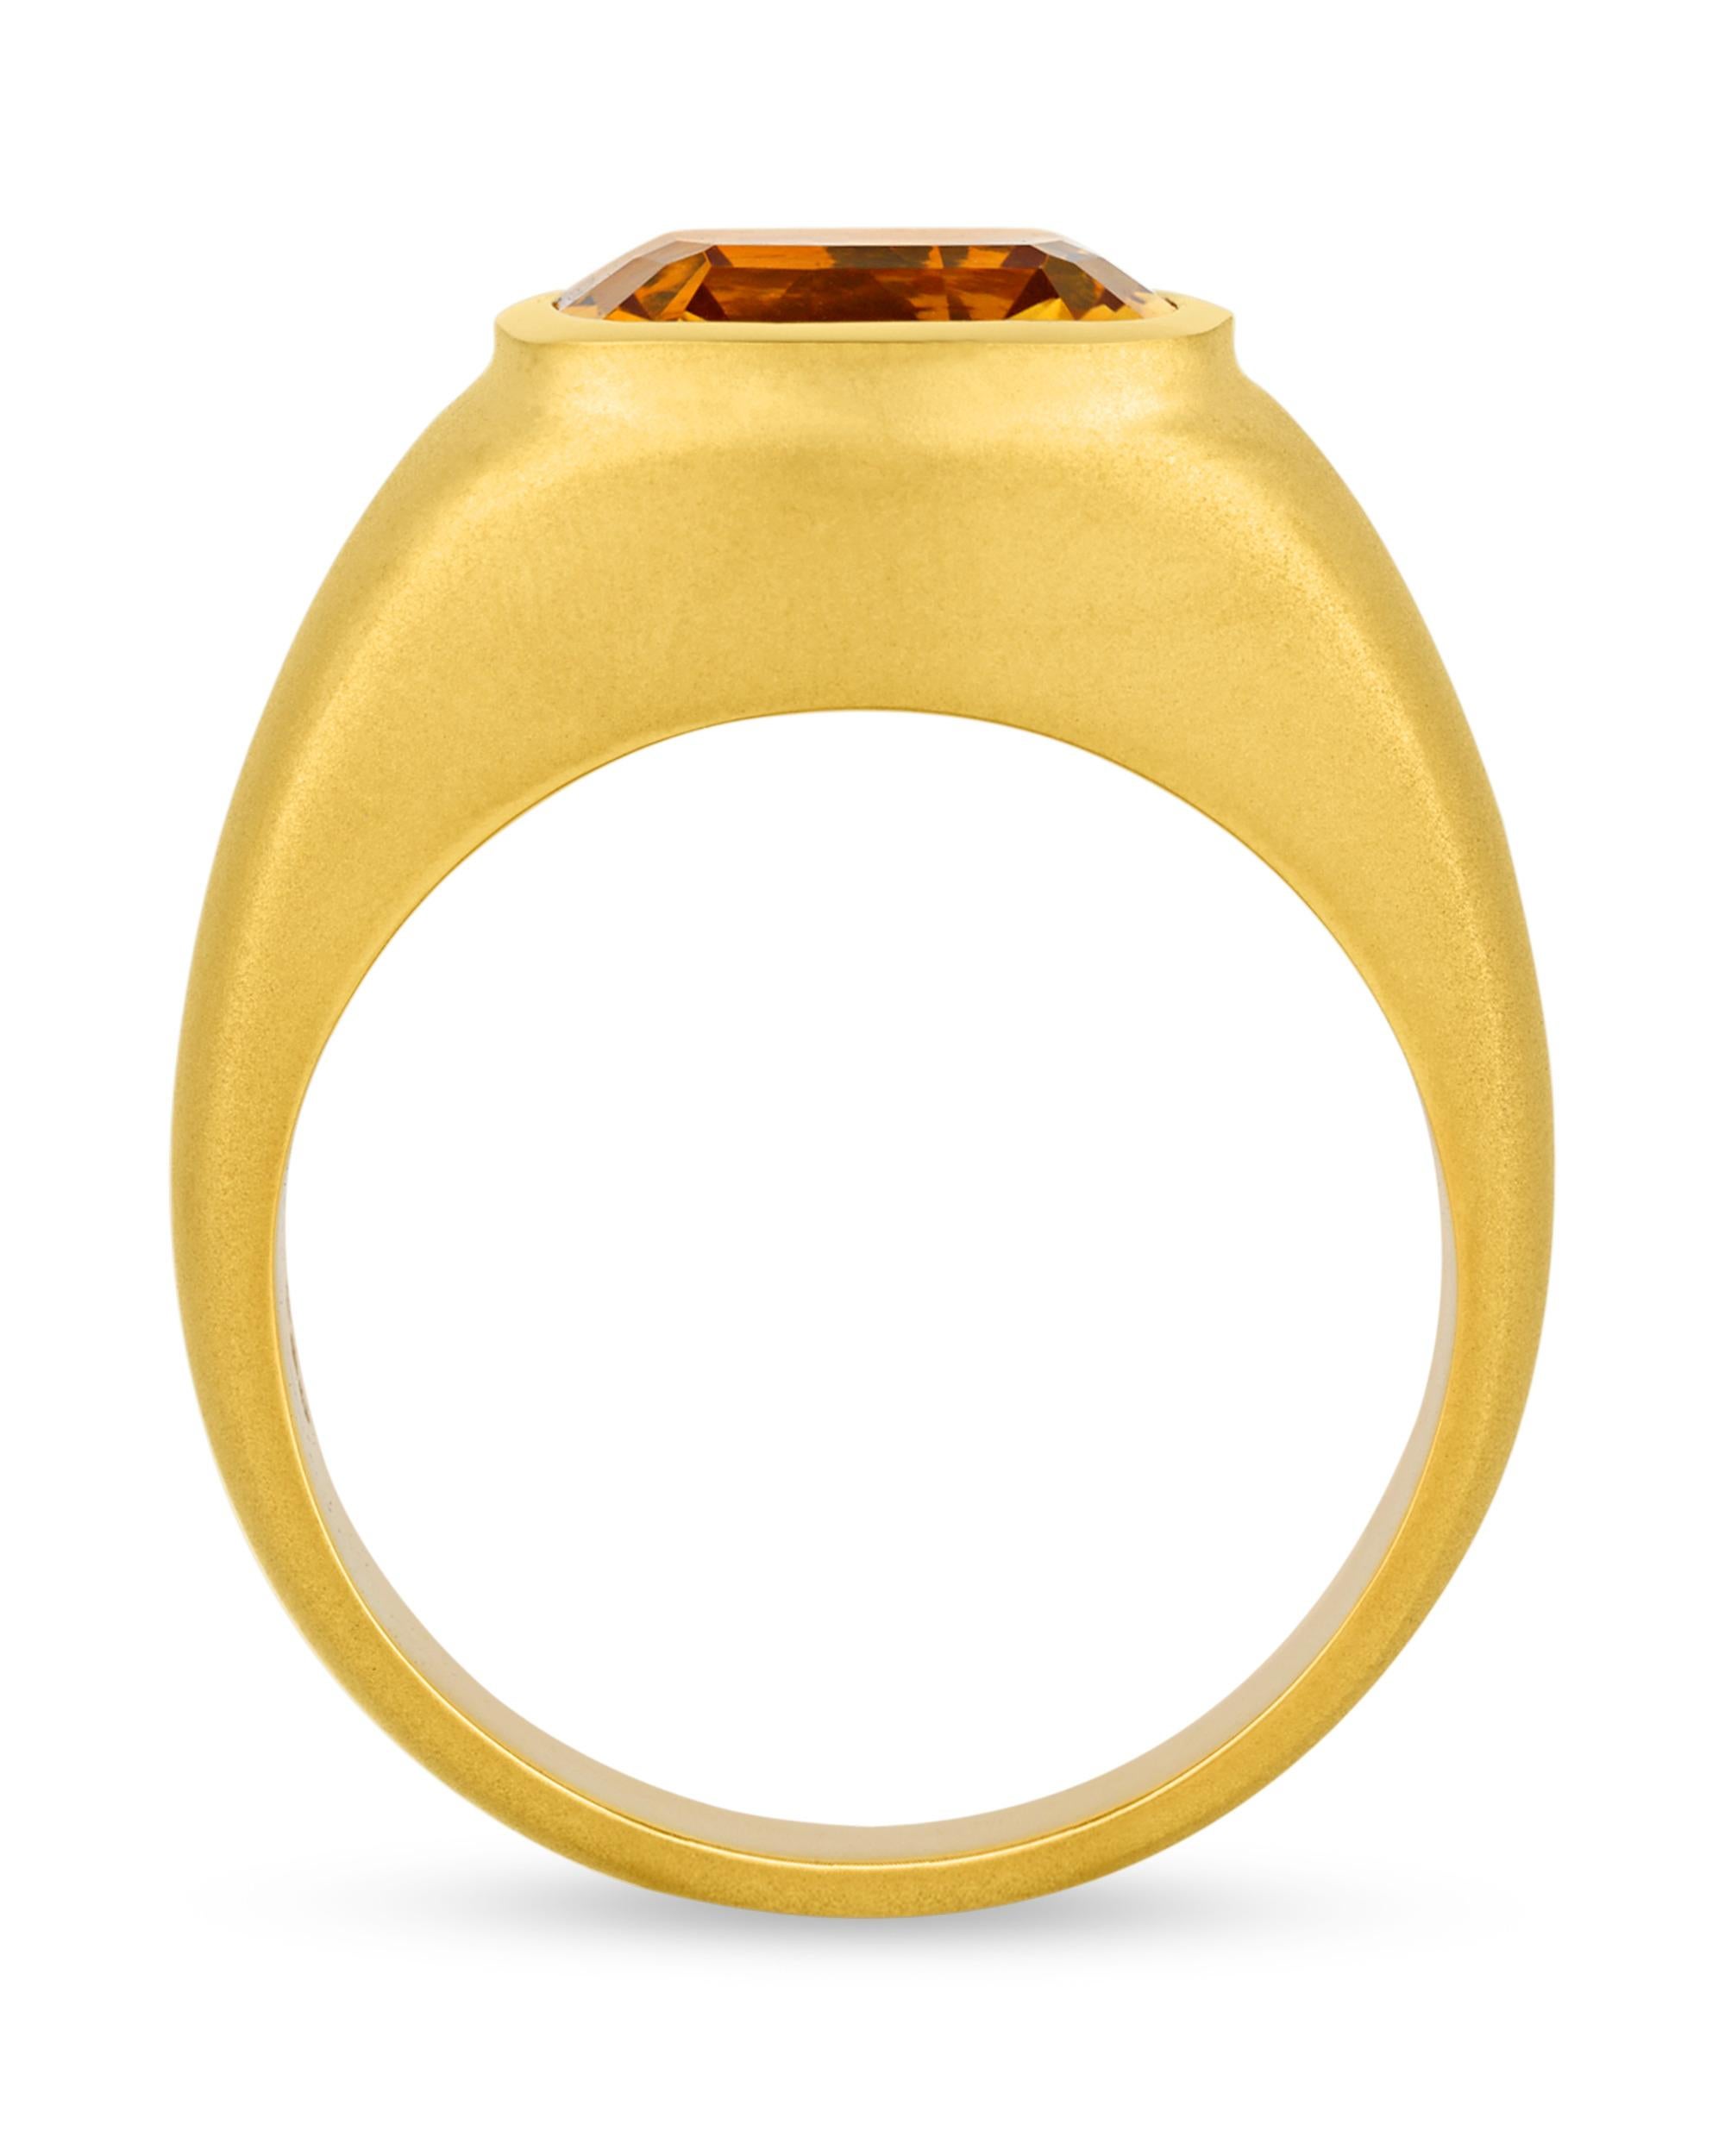 A sunny mixed-cut citrine weighing 6.10 carats centers this stylish men's ring. Exhibiting a warm yellow hue, this jewel is certified by the American Gemological Laboratories and set into a domed 18K yellow gold setting.